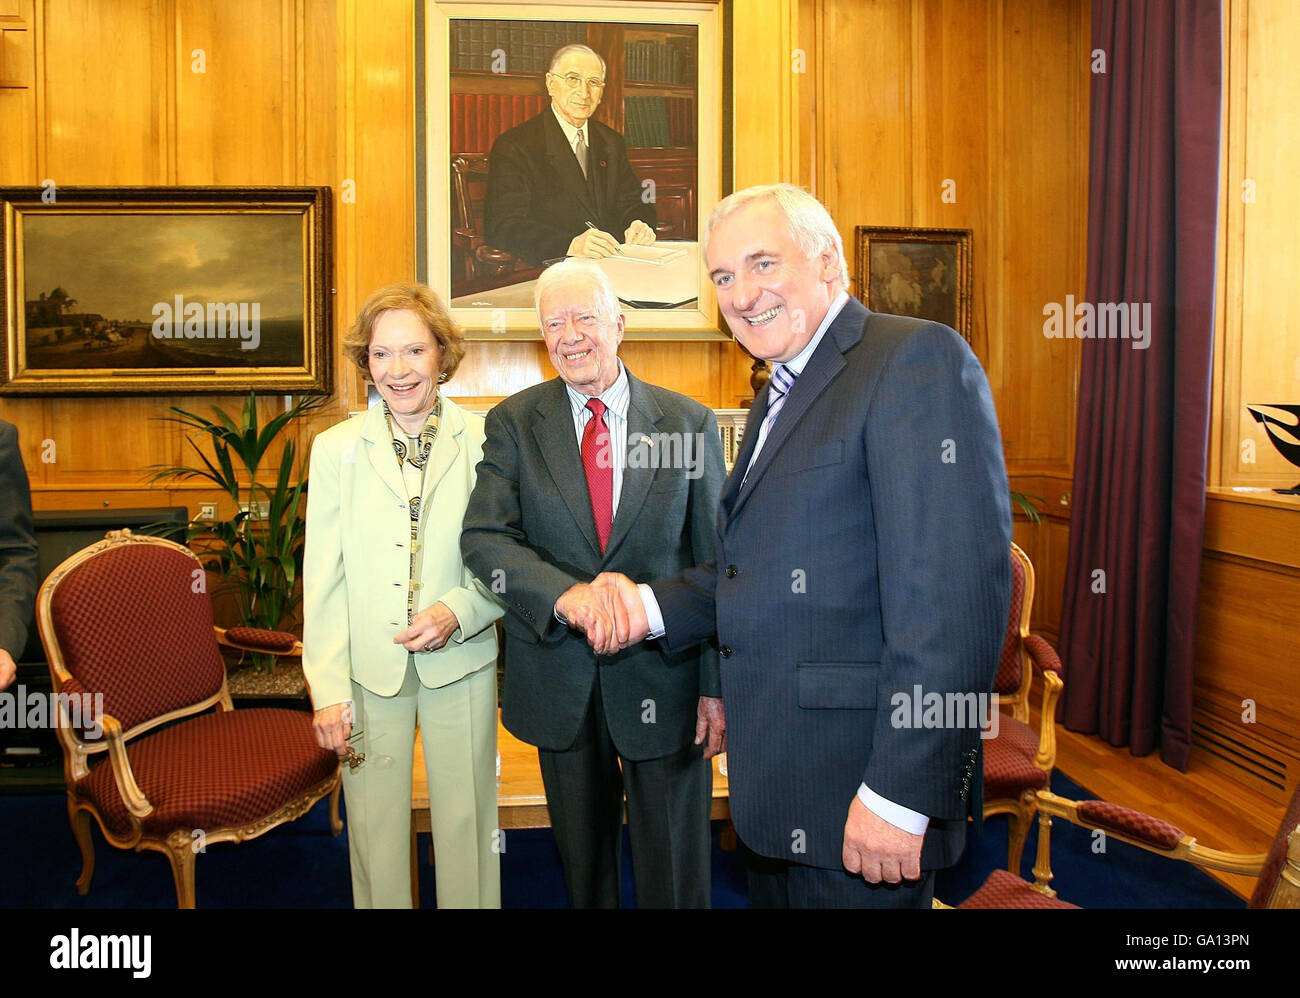 Former US President Jimmy Carter with wife Rosalyn visits the Taoiseach Bertie Ahern TD at Government Buildings, Dublin. Stock Photo